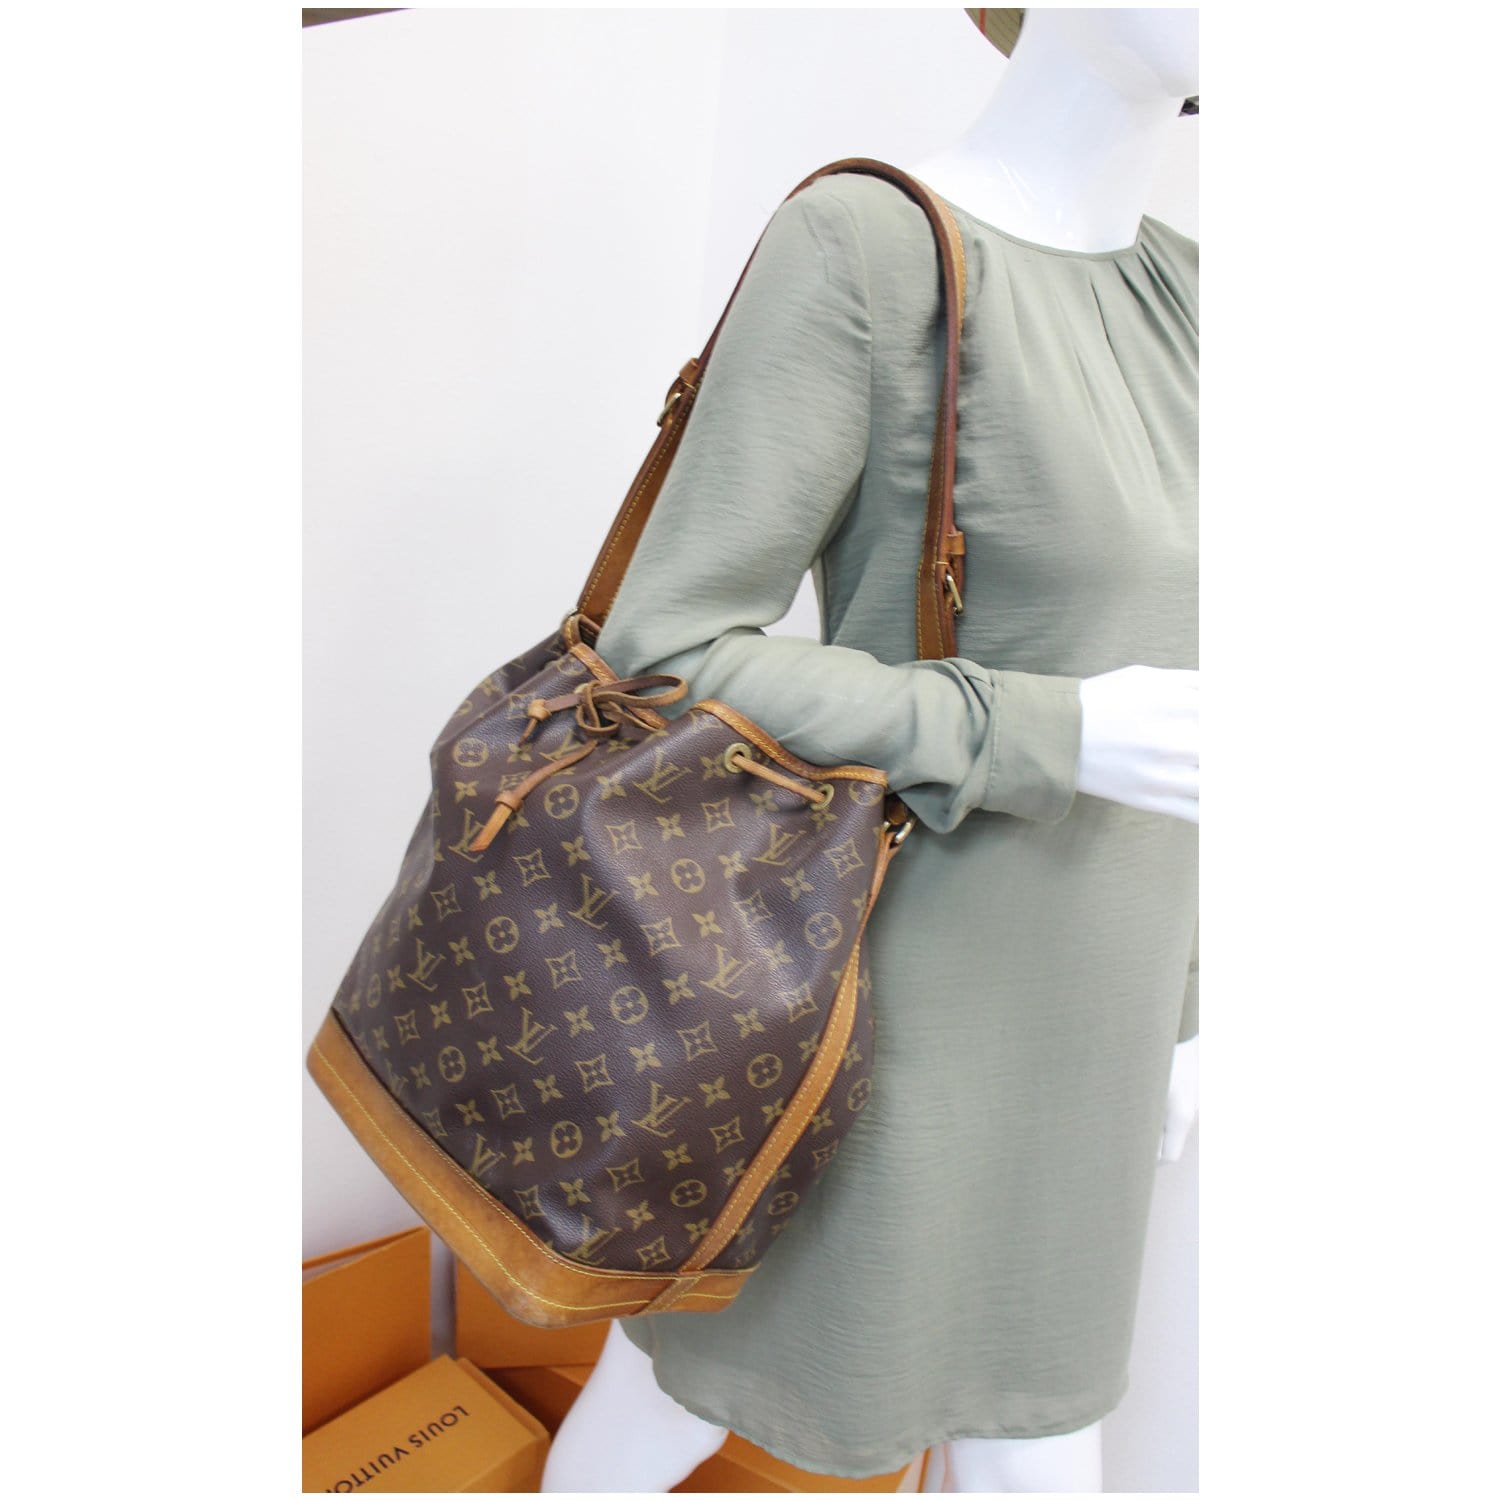 Lot - Louis Vuitton Noe PM Shoulder Bag, in a brown monogram coated canvas,  with vachetta leather and golden brass hardware, with a brown